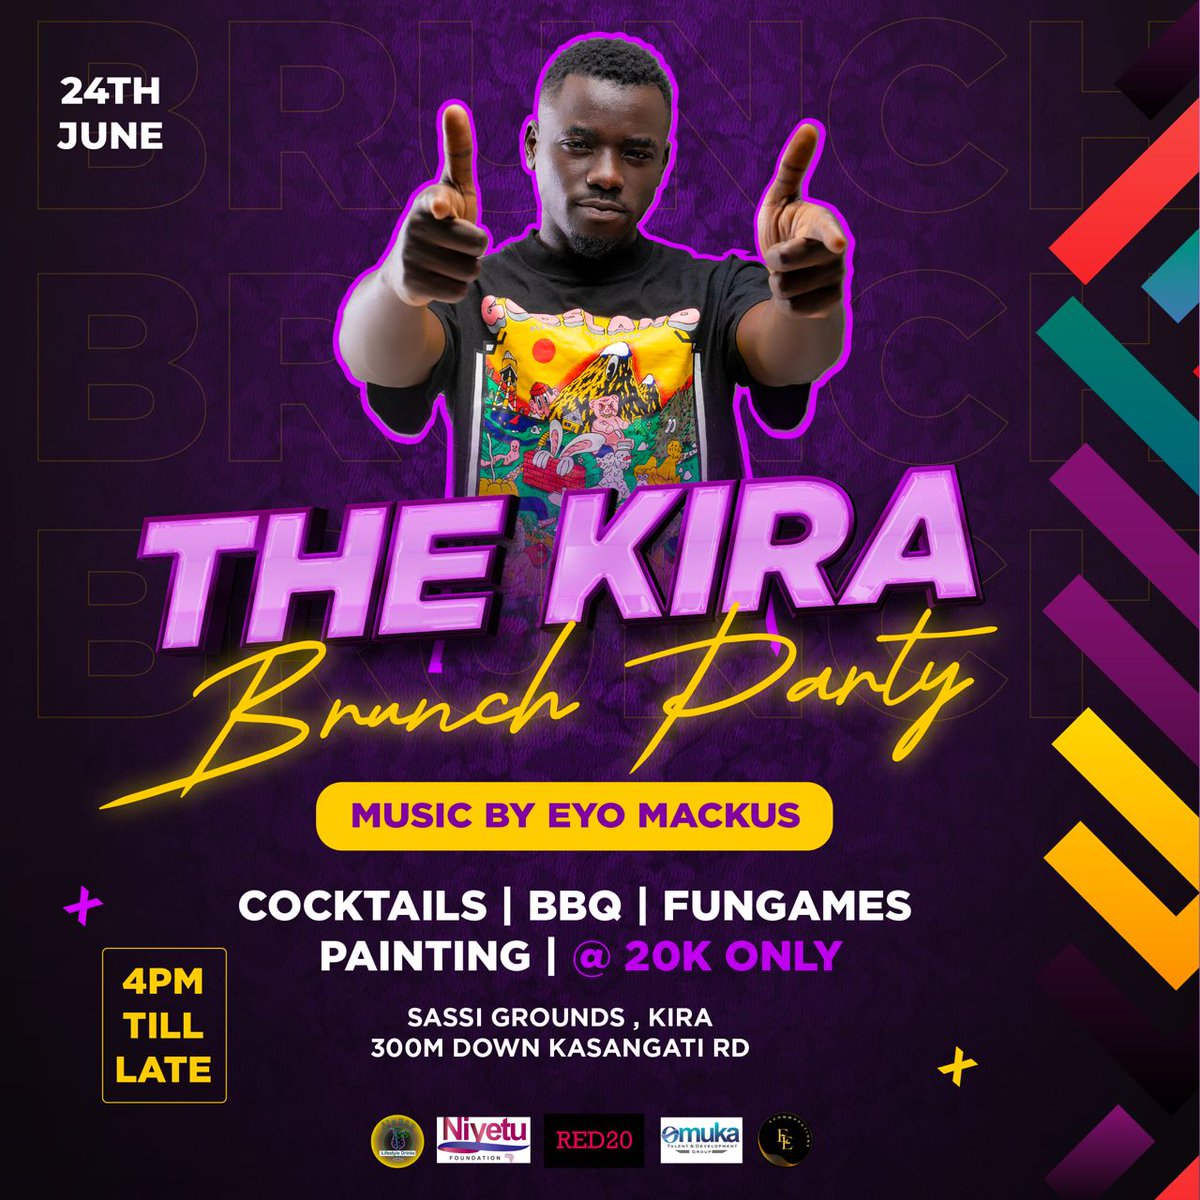 Its just a few hours to our Kiira Brunch this Saturday afternoon till late. Come enjoy live band, karaoke, board games, barbeque, quiz night, bucket night , free painting lessons ,Cocktails from the best Mixologist & above all come network & put that ka money into circulation.